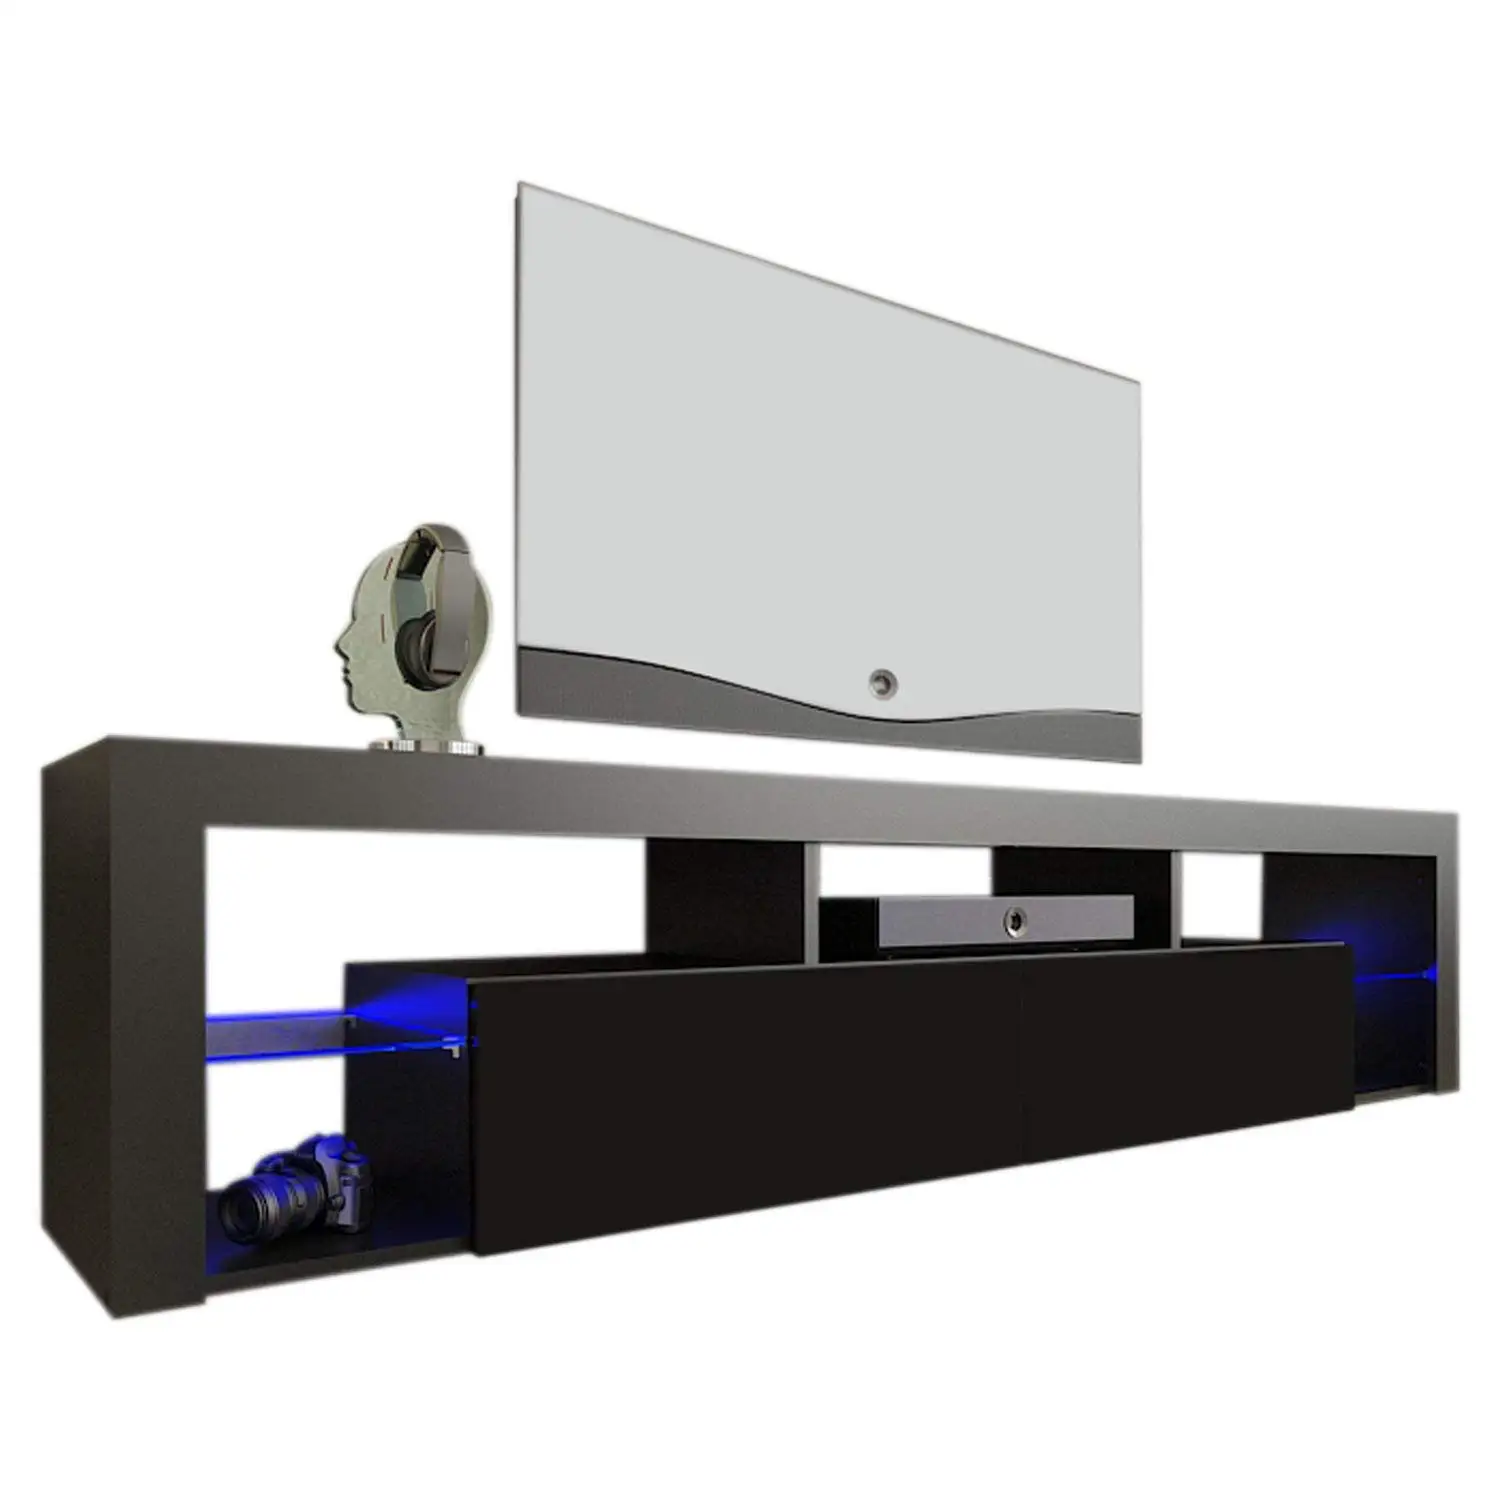 Cheap Tv Stand For Wall, find Tv Stand For Wall deals on ...